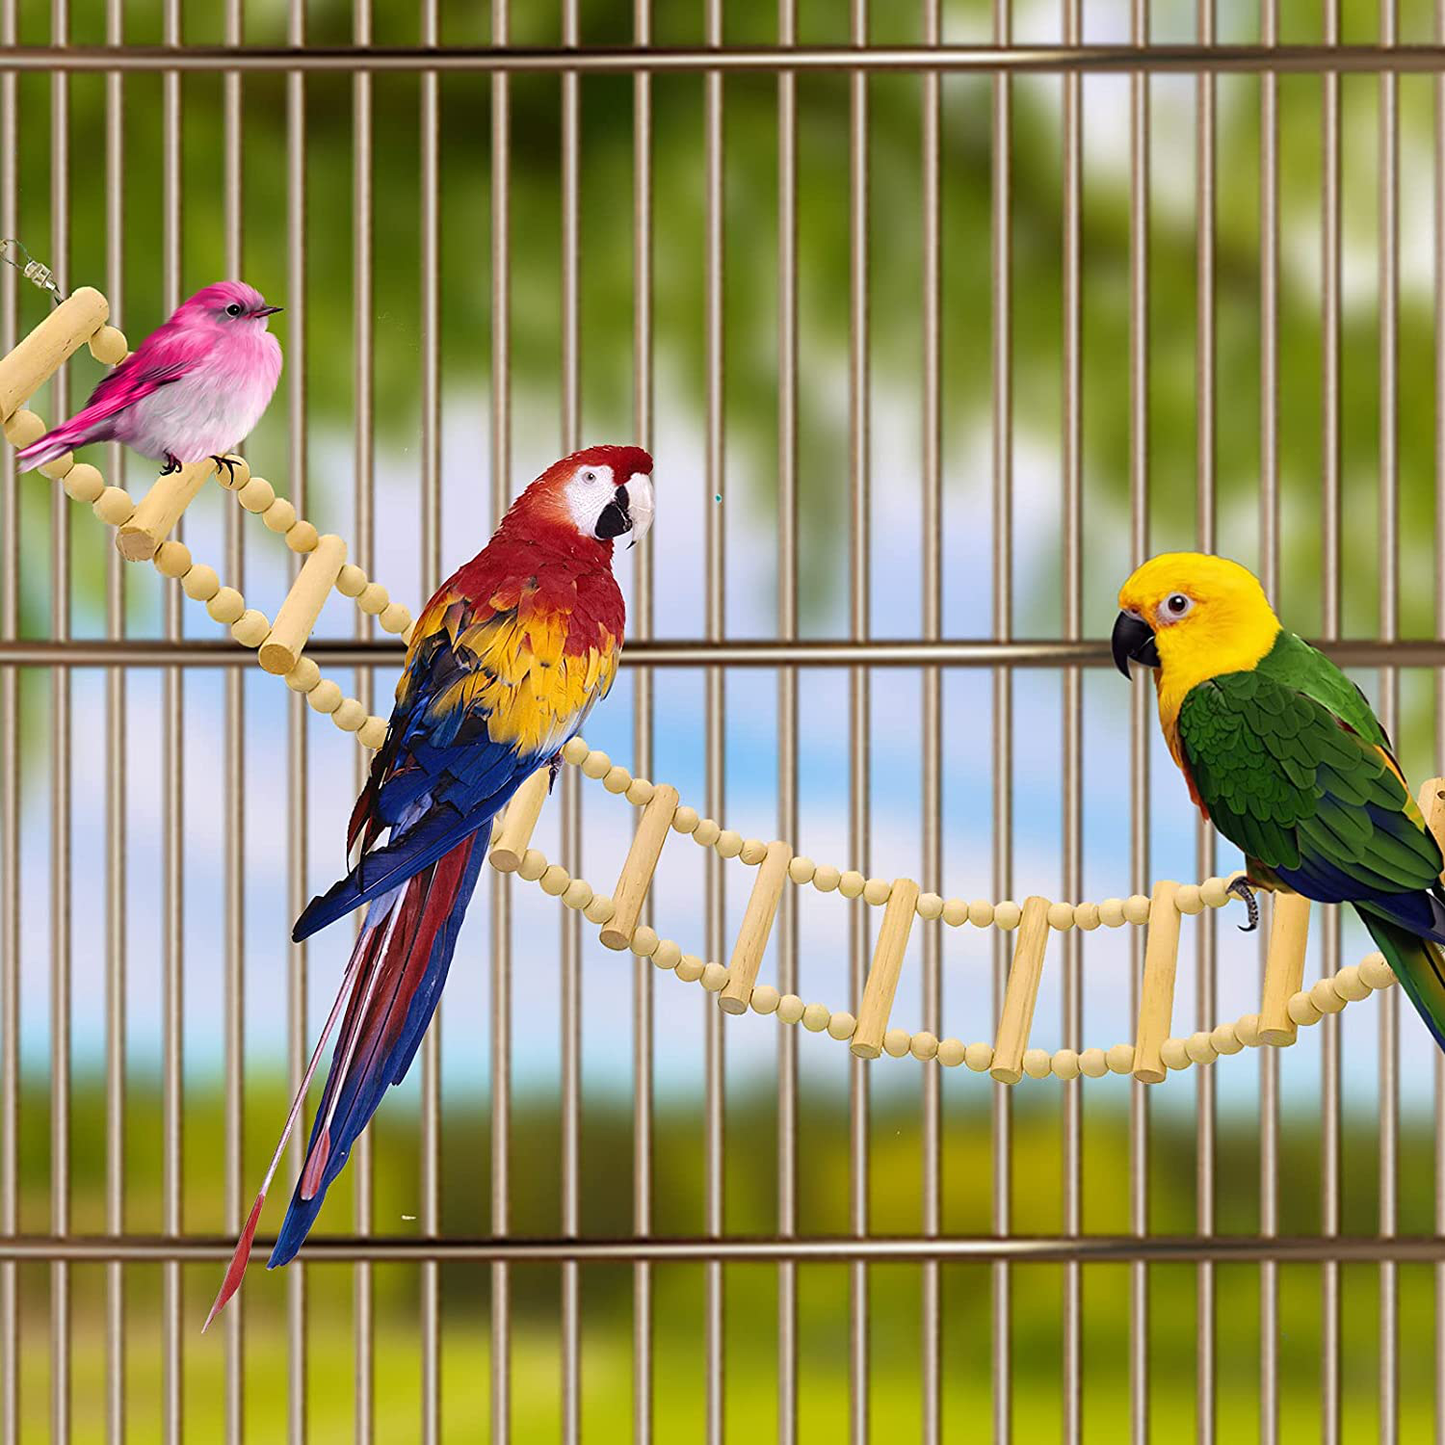 Dnoifne Bird Wooden Ladder Bridge, Ladders Swing Chewing Toys, Hanging Pet Bird Cage Accessories, Funny Perch Training Toys for Bird Parrot Macaw African Budgies Cockatiels Parakeet Hamster Squirrel